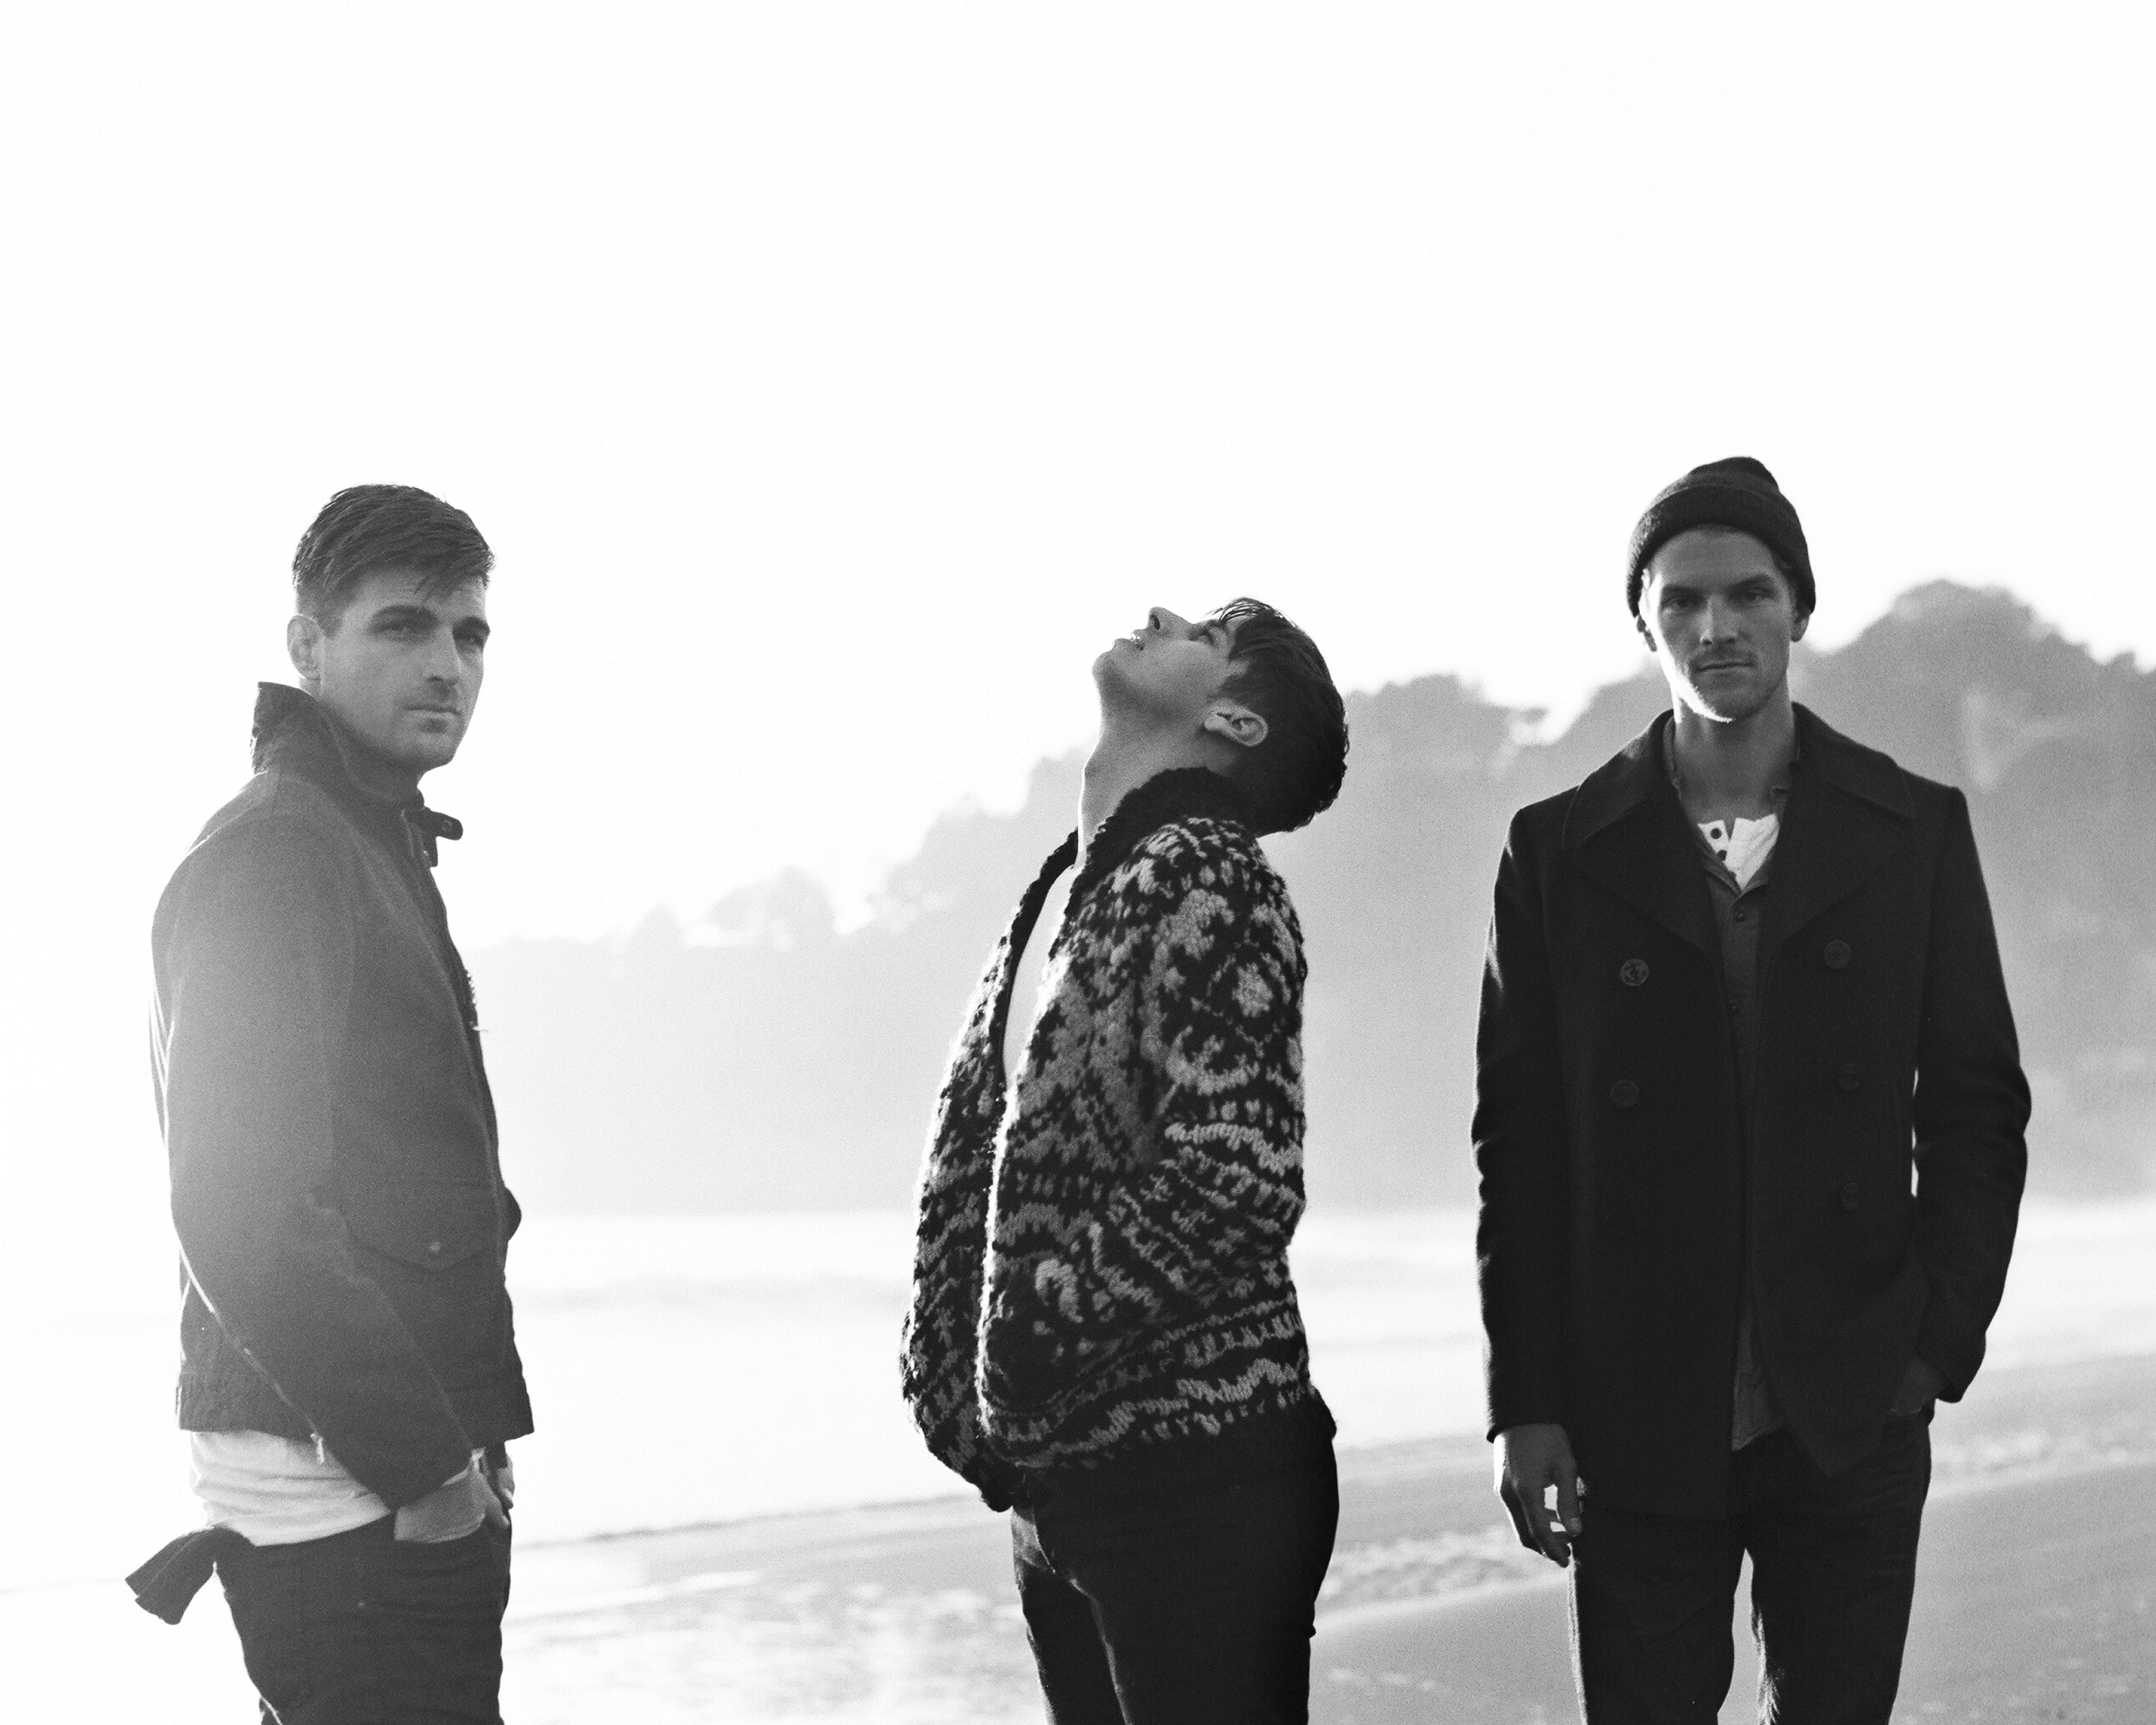 Nice Images Collection: Foster The People Desktop Wallpapers